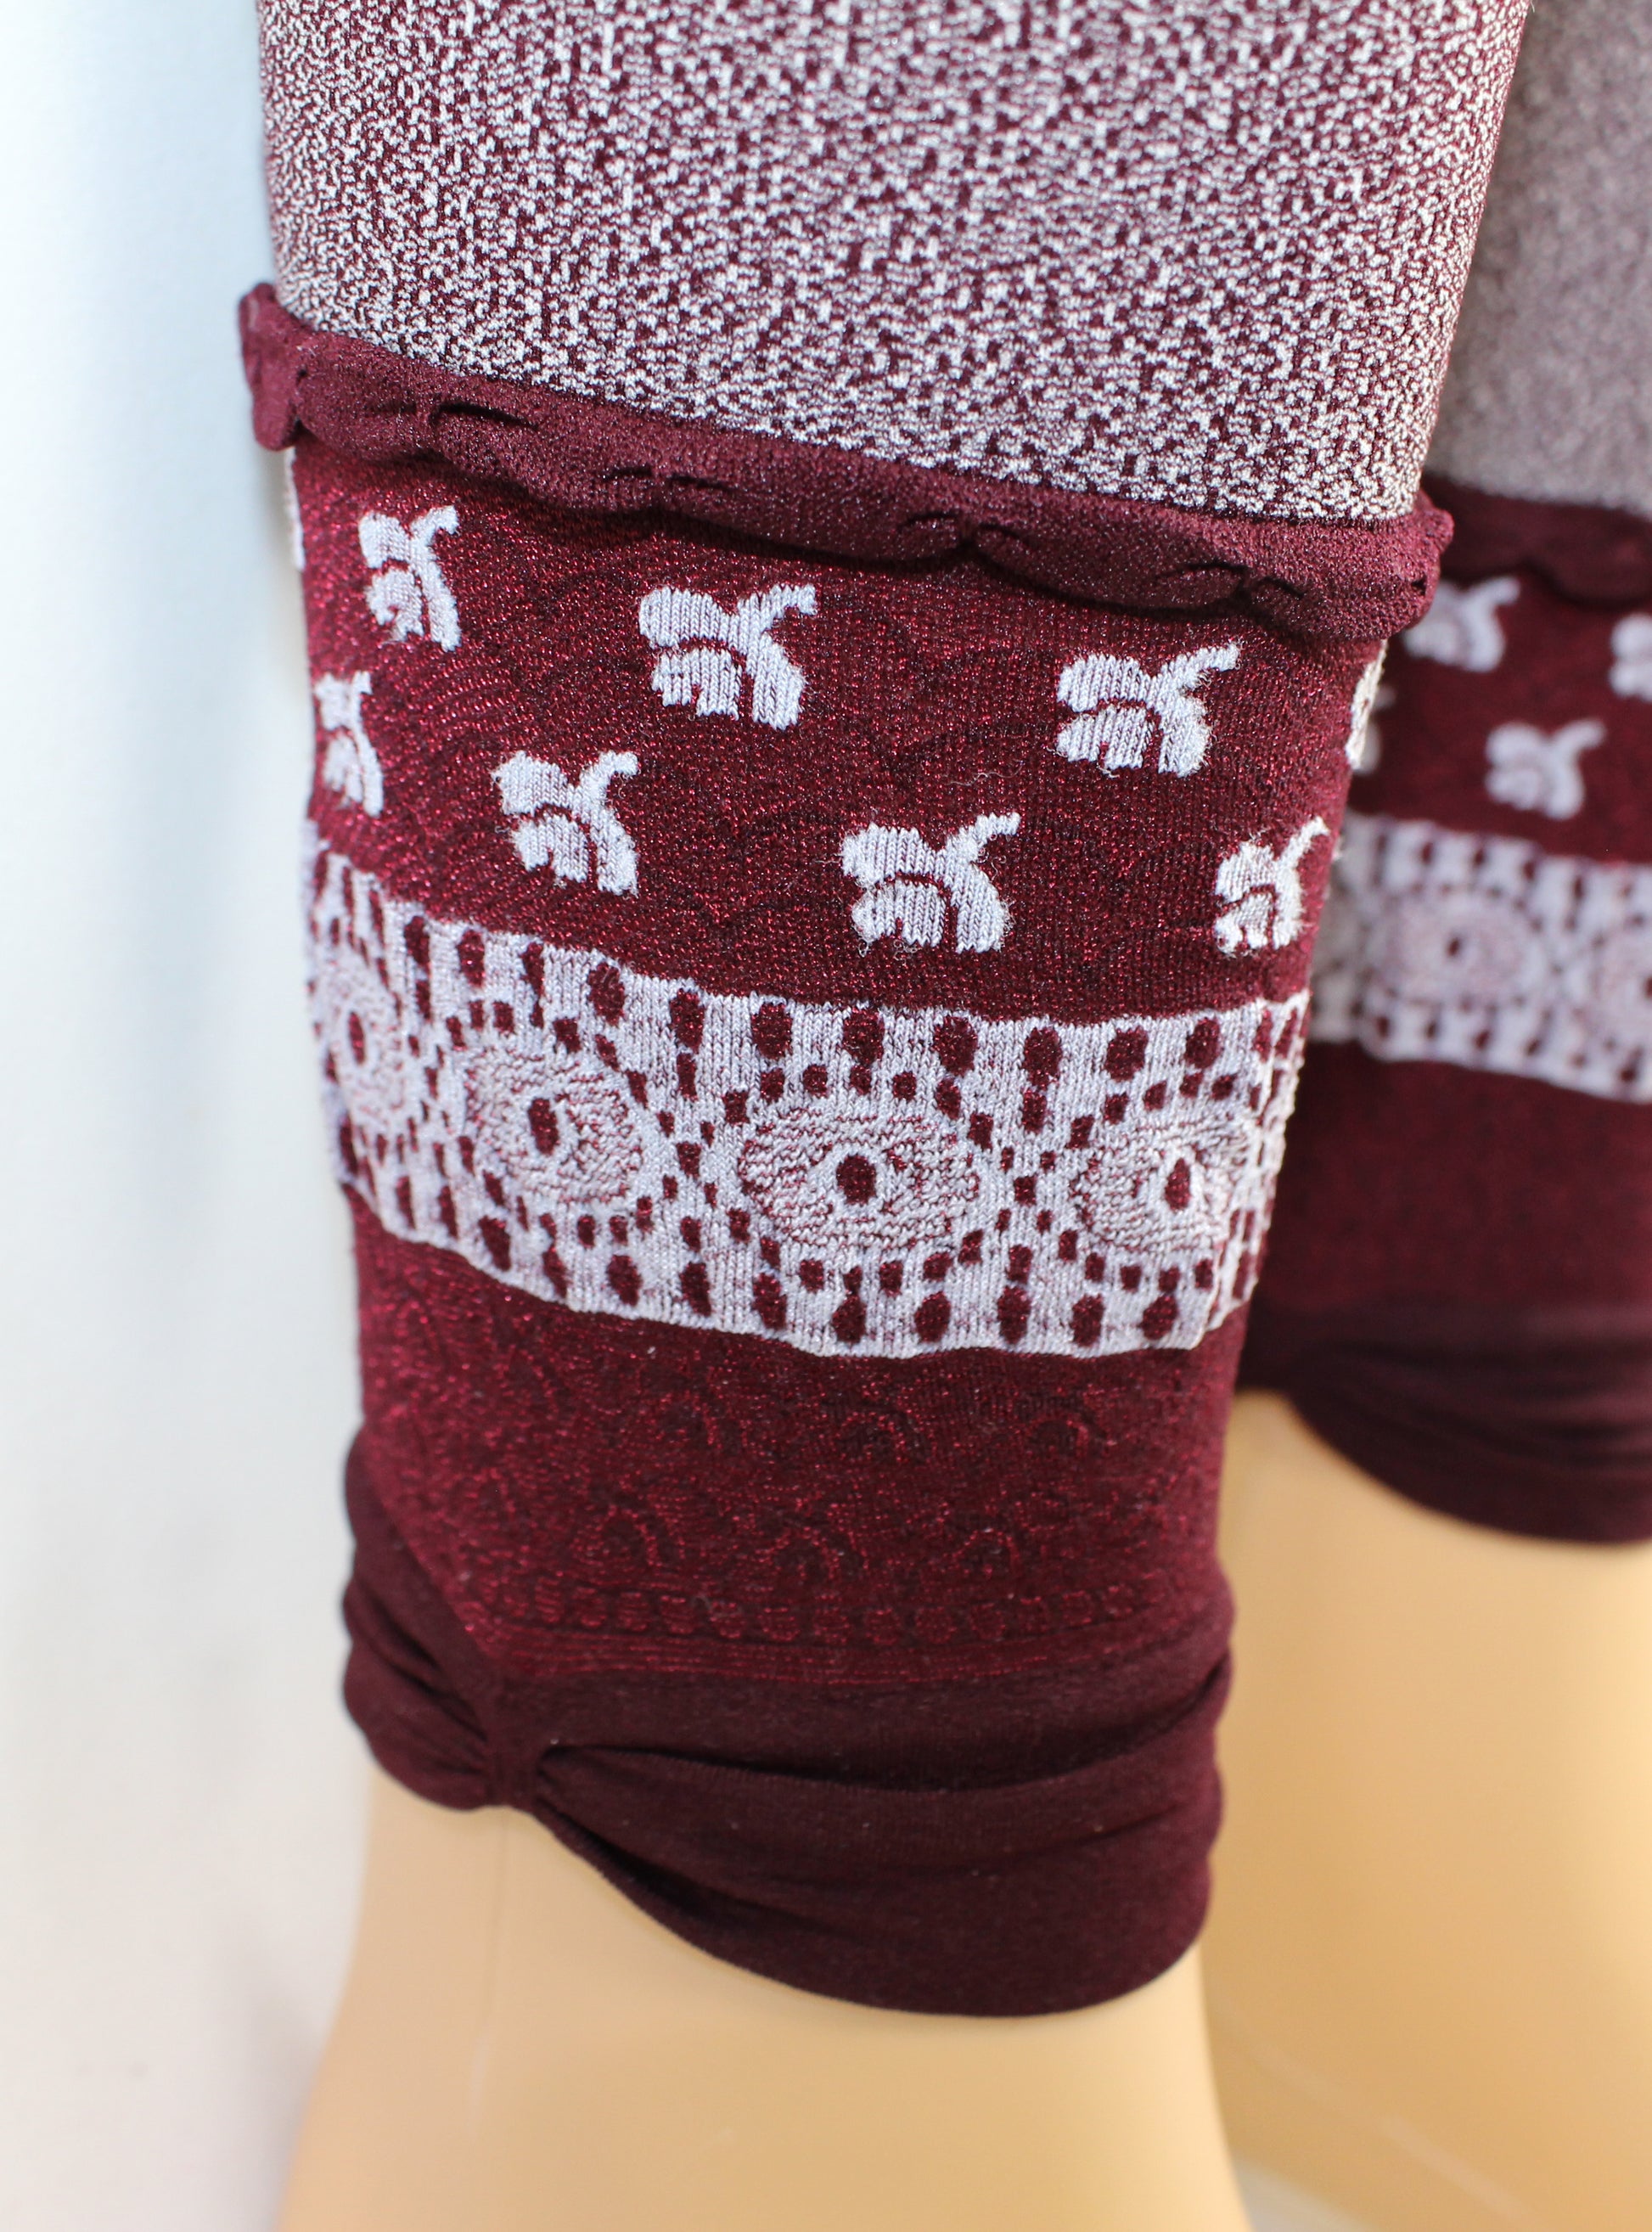 Omsa Peppermint Pantacollant - Soft ultra opaque kid's footless tights with an all over burgundy, wine and white fleck effect and deep embroidered cuff with a woven floral lace and flower pattern and ruched cuff.